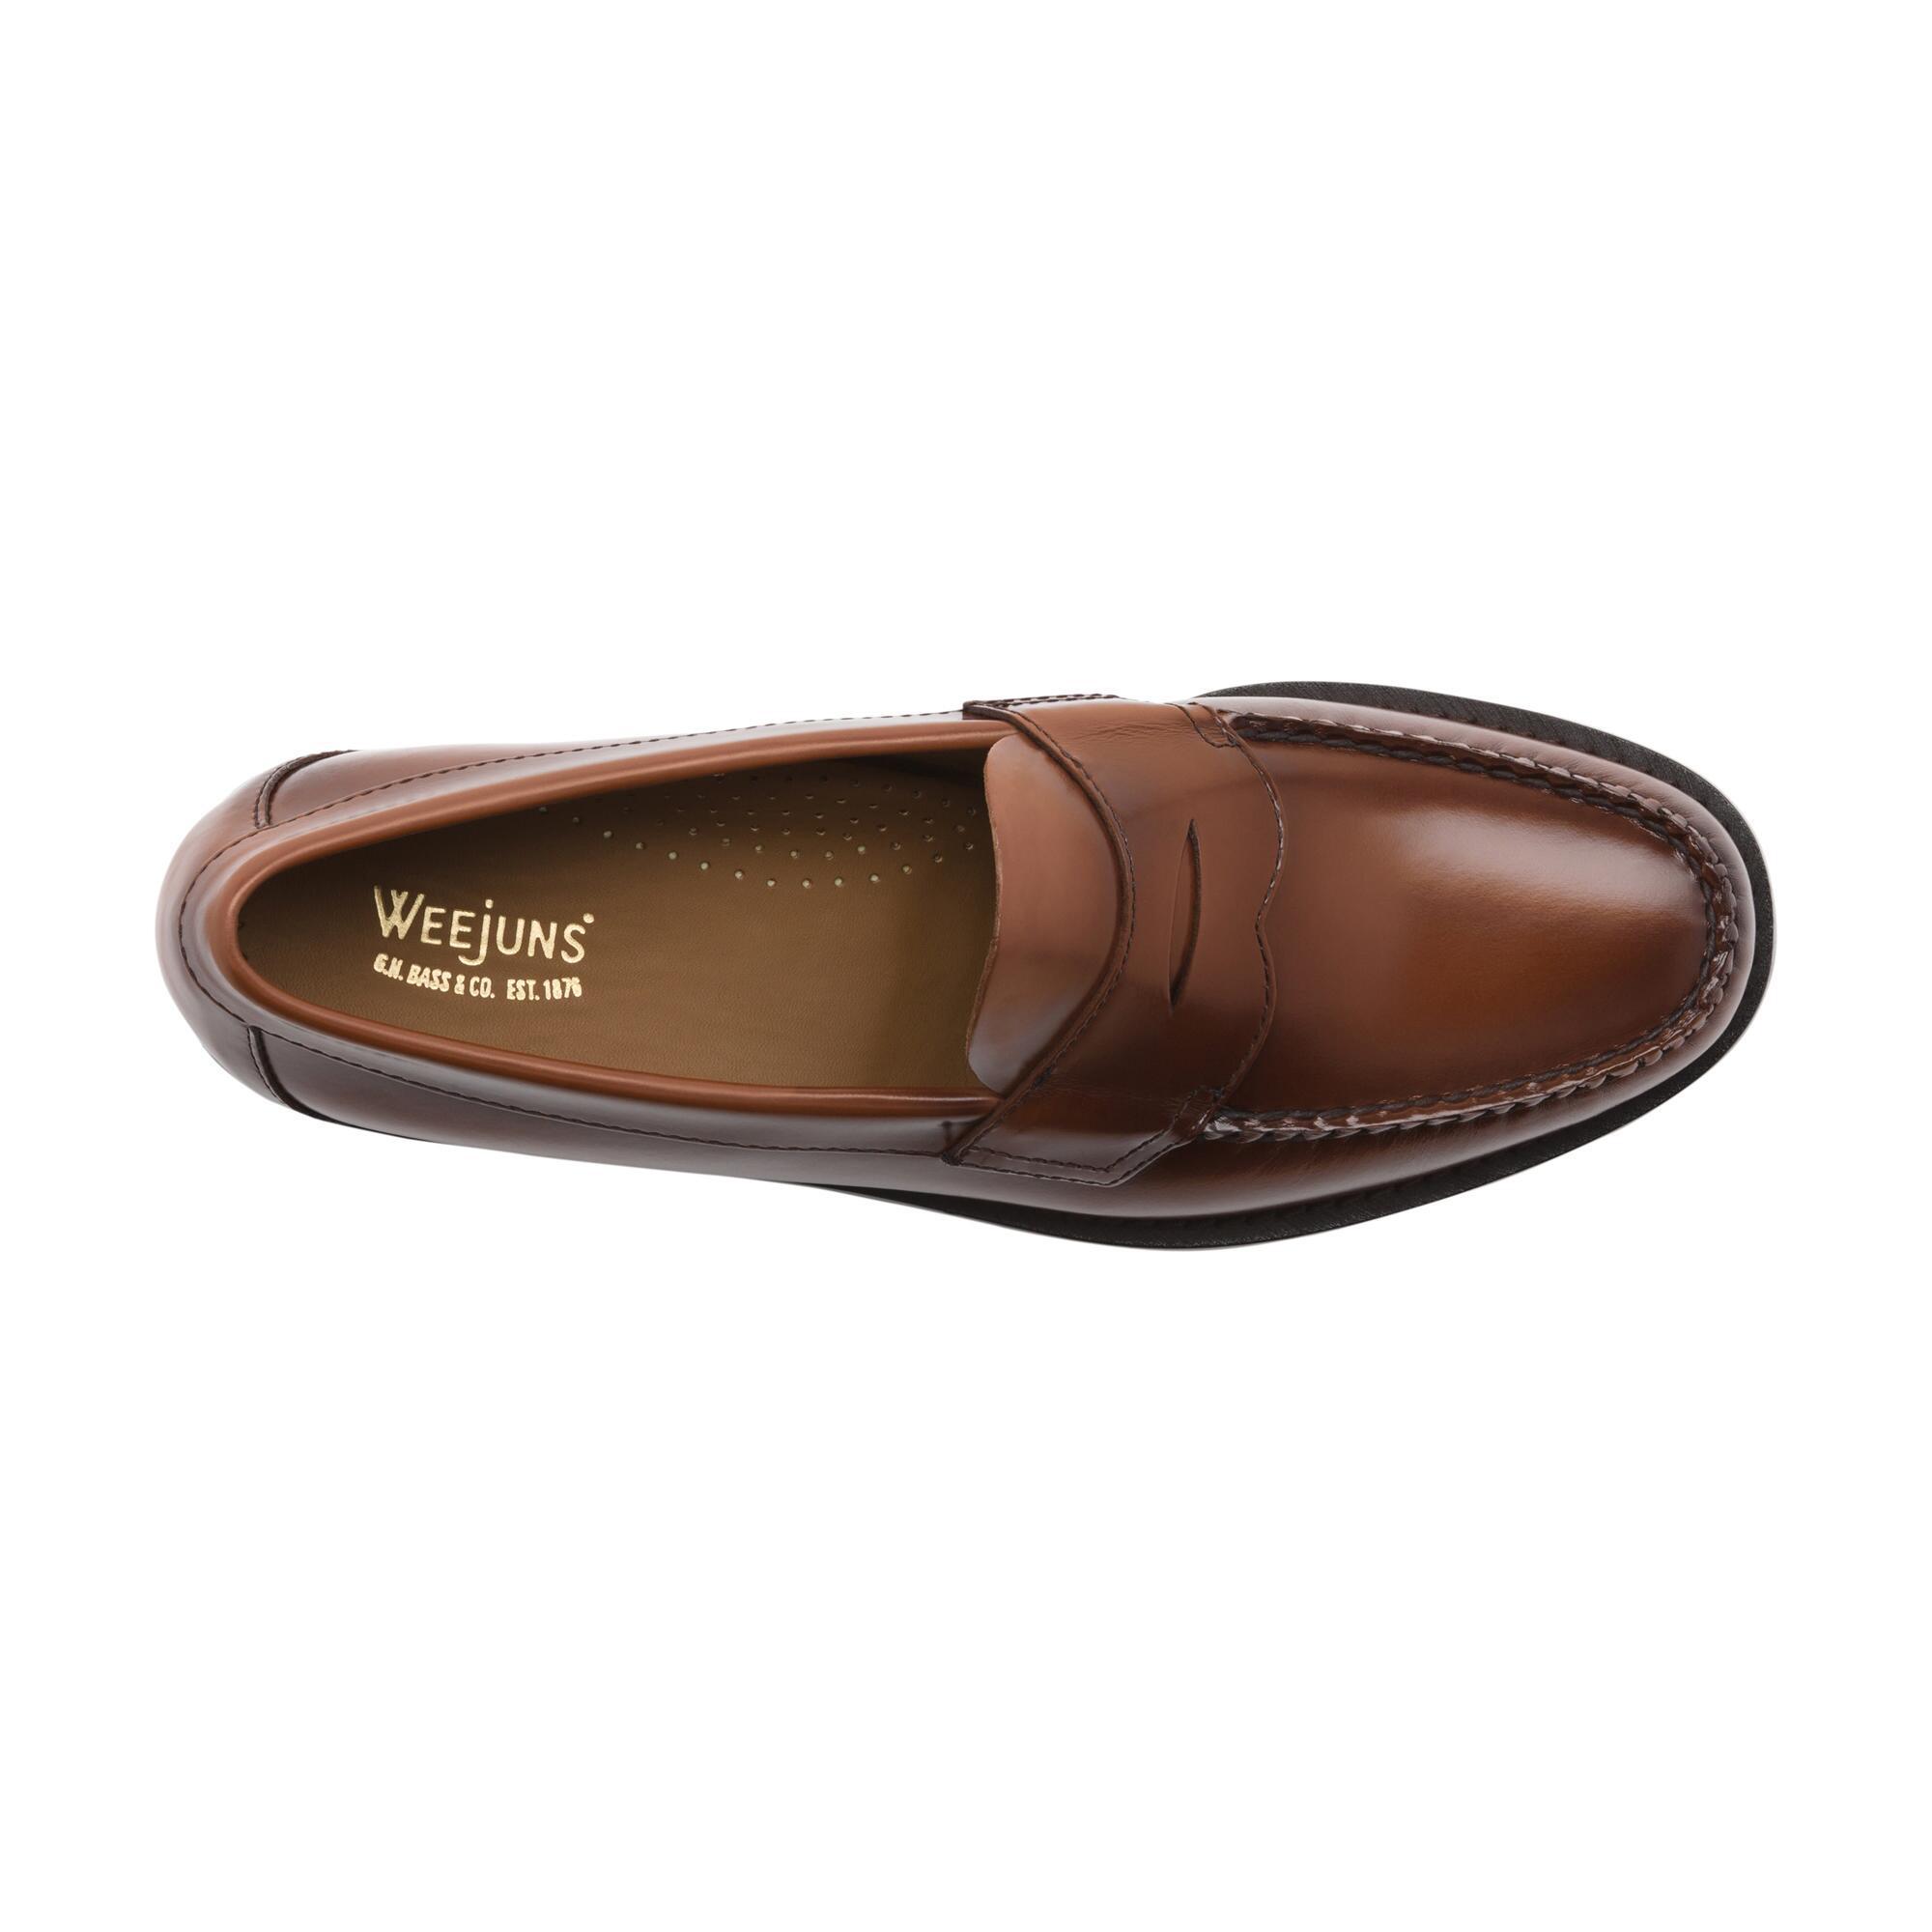 Lyst - G.H.BASS Logan Flat Strap Weejuns in Brown for Men